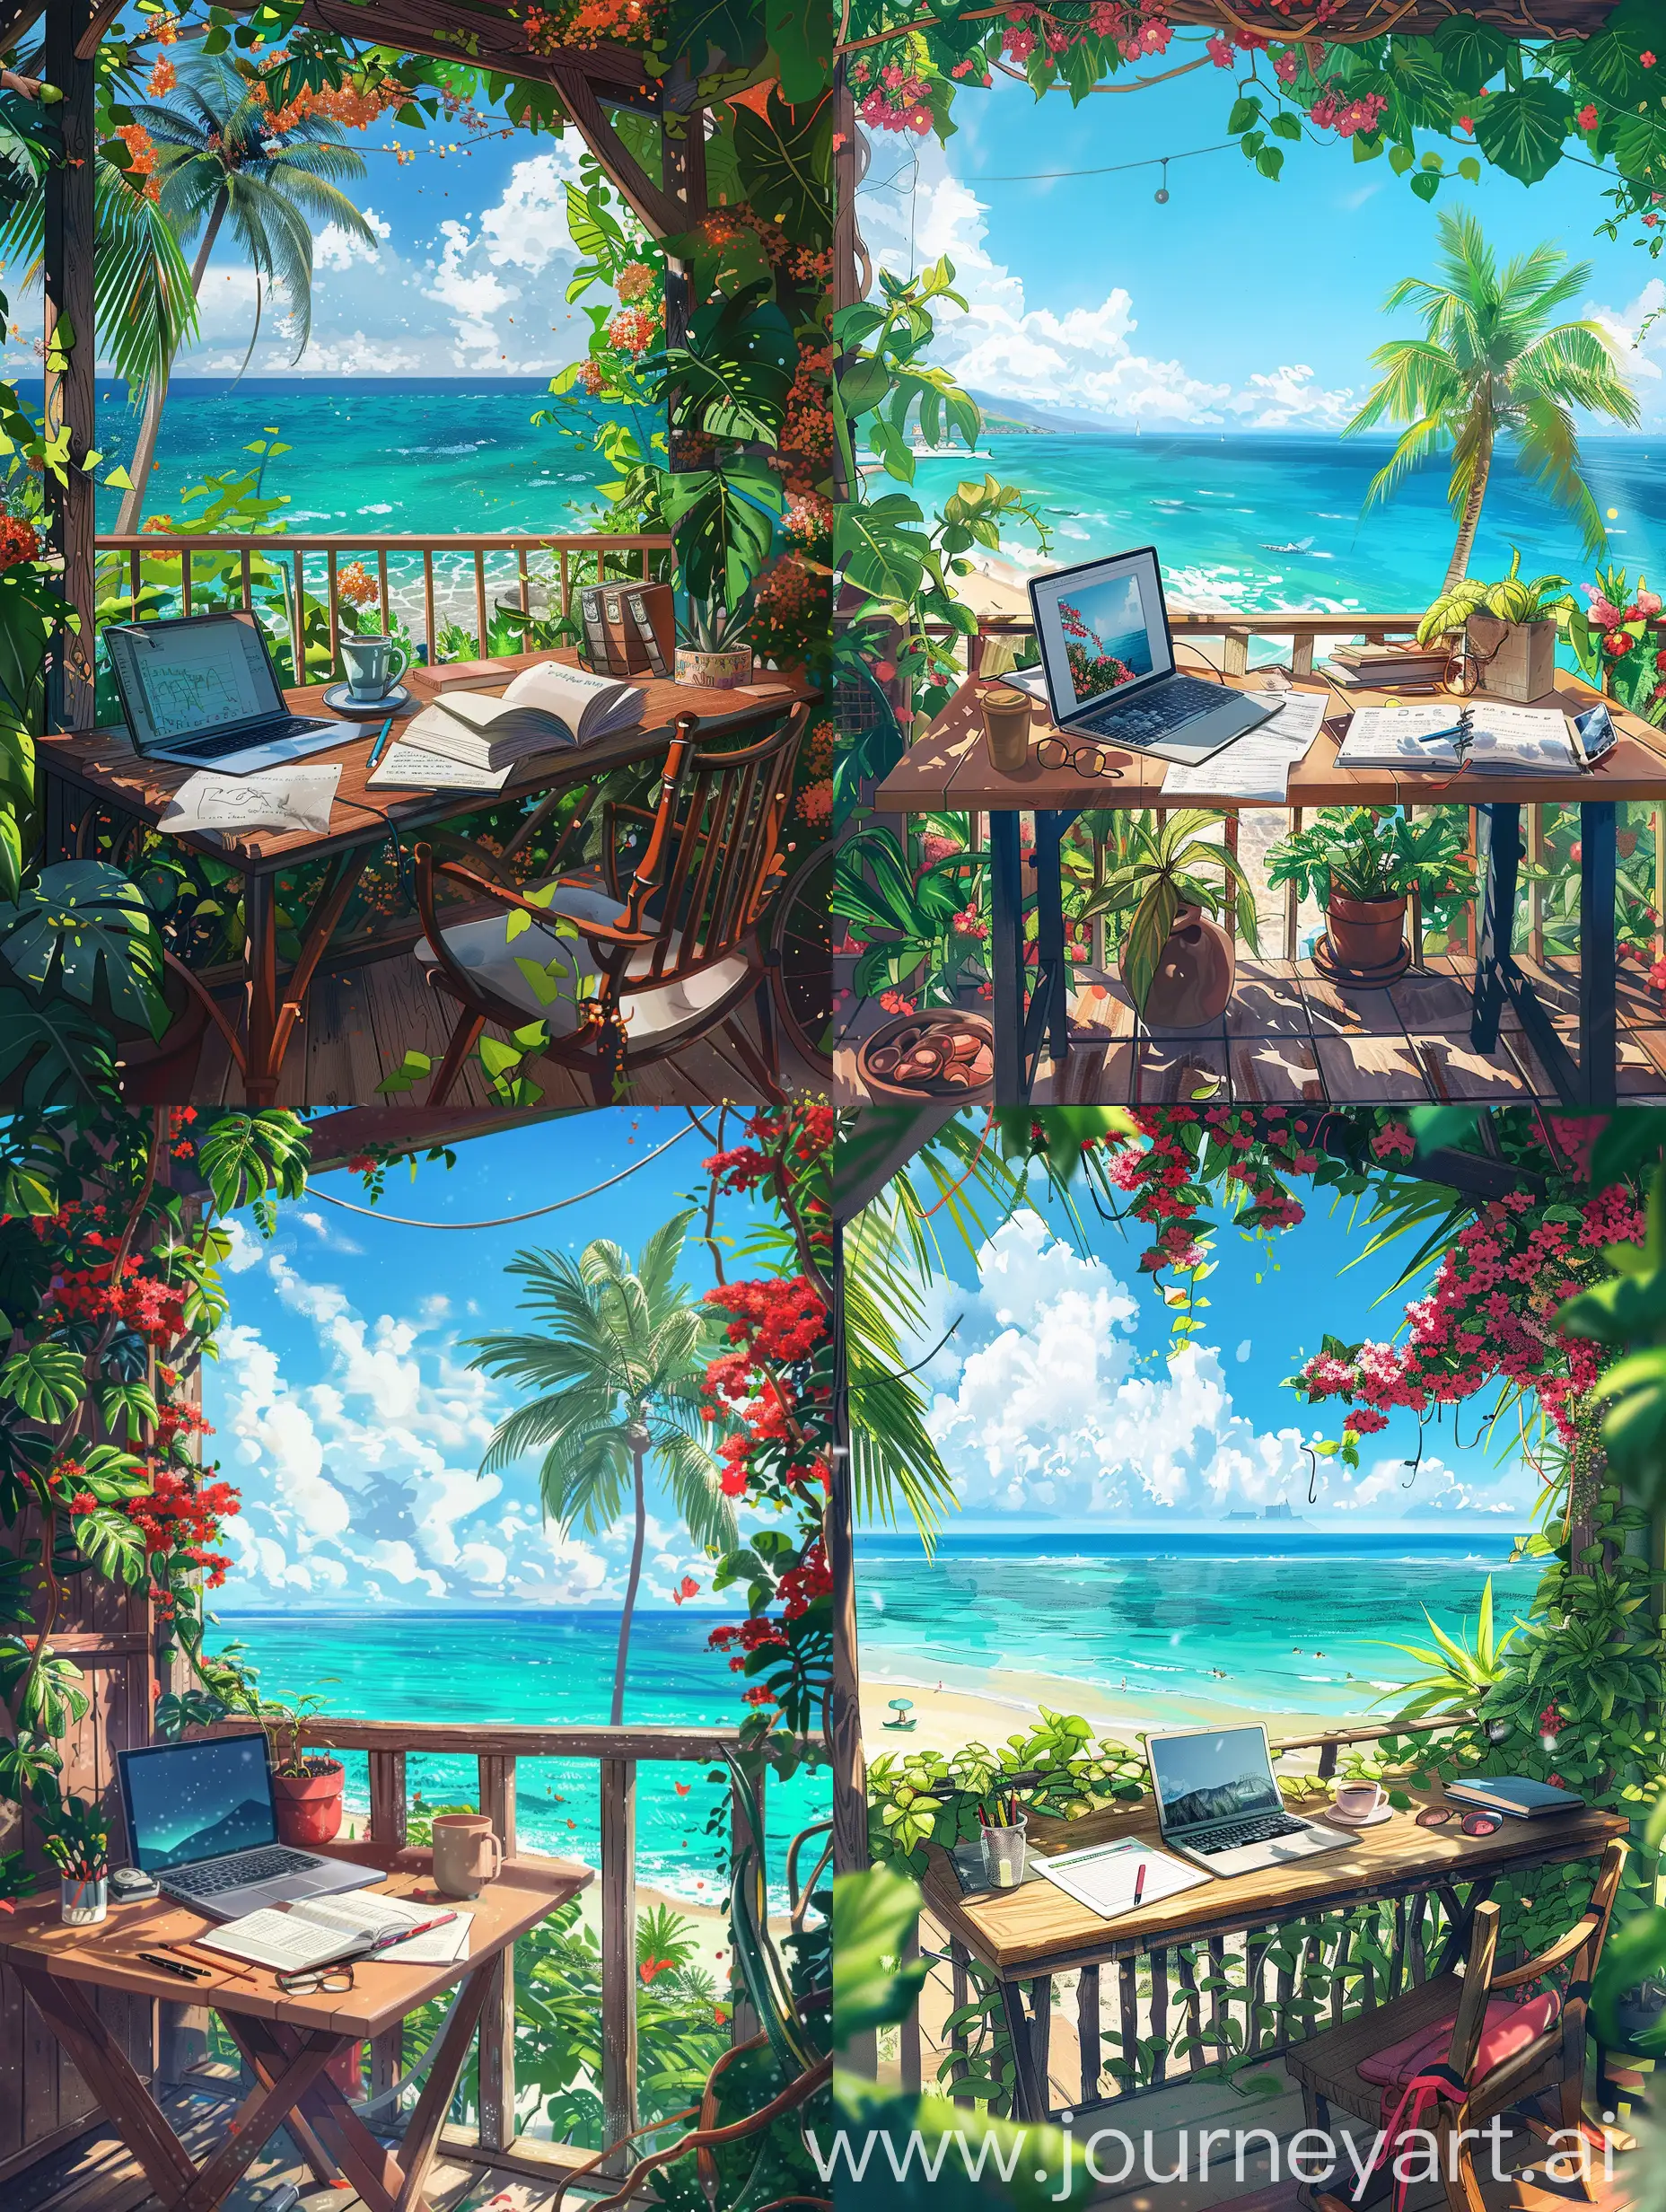 A cozy outdoor workspace on a balcony overlooking the ocean. The wooden table holds an open laptop, papers, books, a cup of coffee, a pen, and a potted plant. The balcony is adorned with vibrant flowering vines, and the background features tropical palm trees and a clear view of the blue sea and sky, aesthetic weather, frame is filled with elements, anime style art, aesthetic anime art, studio ghibli styled, studio ghibli aesthetic art